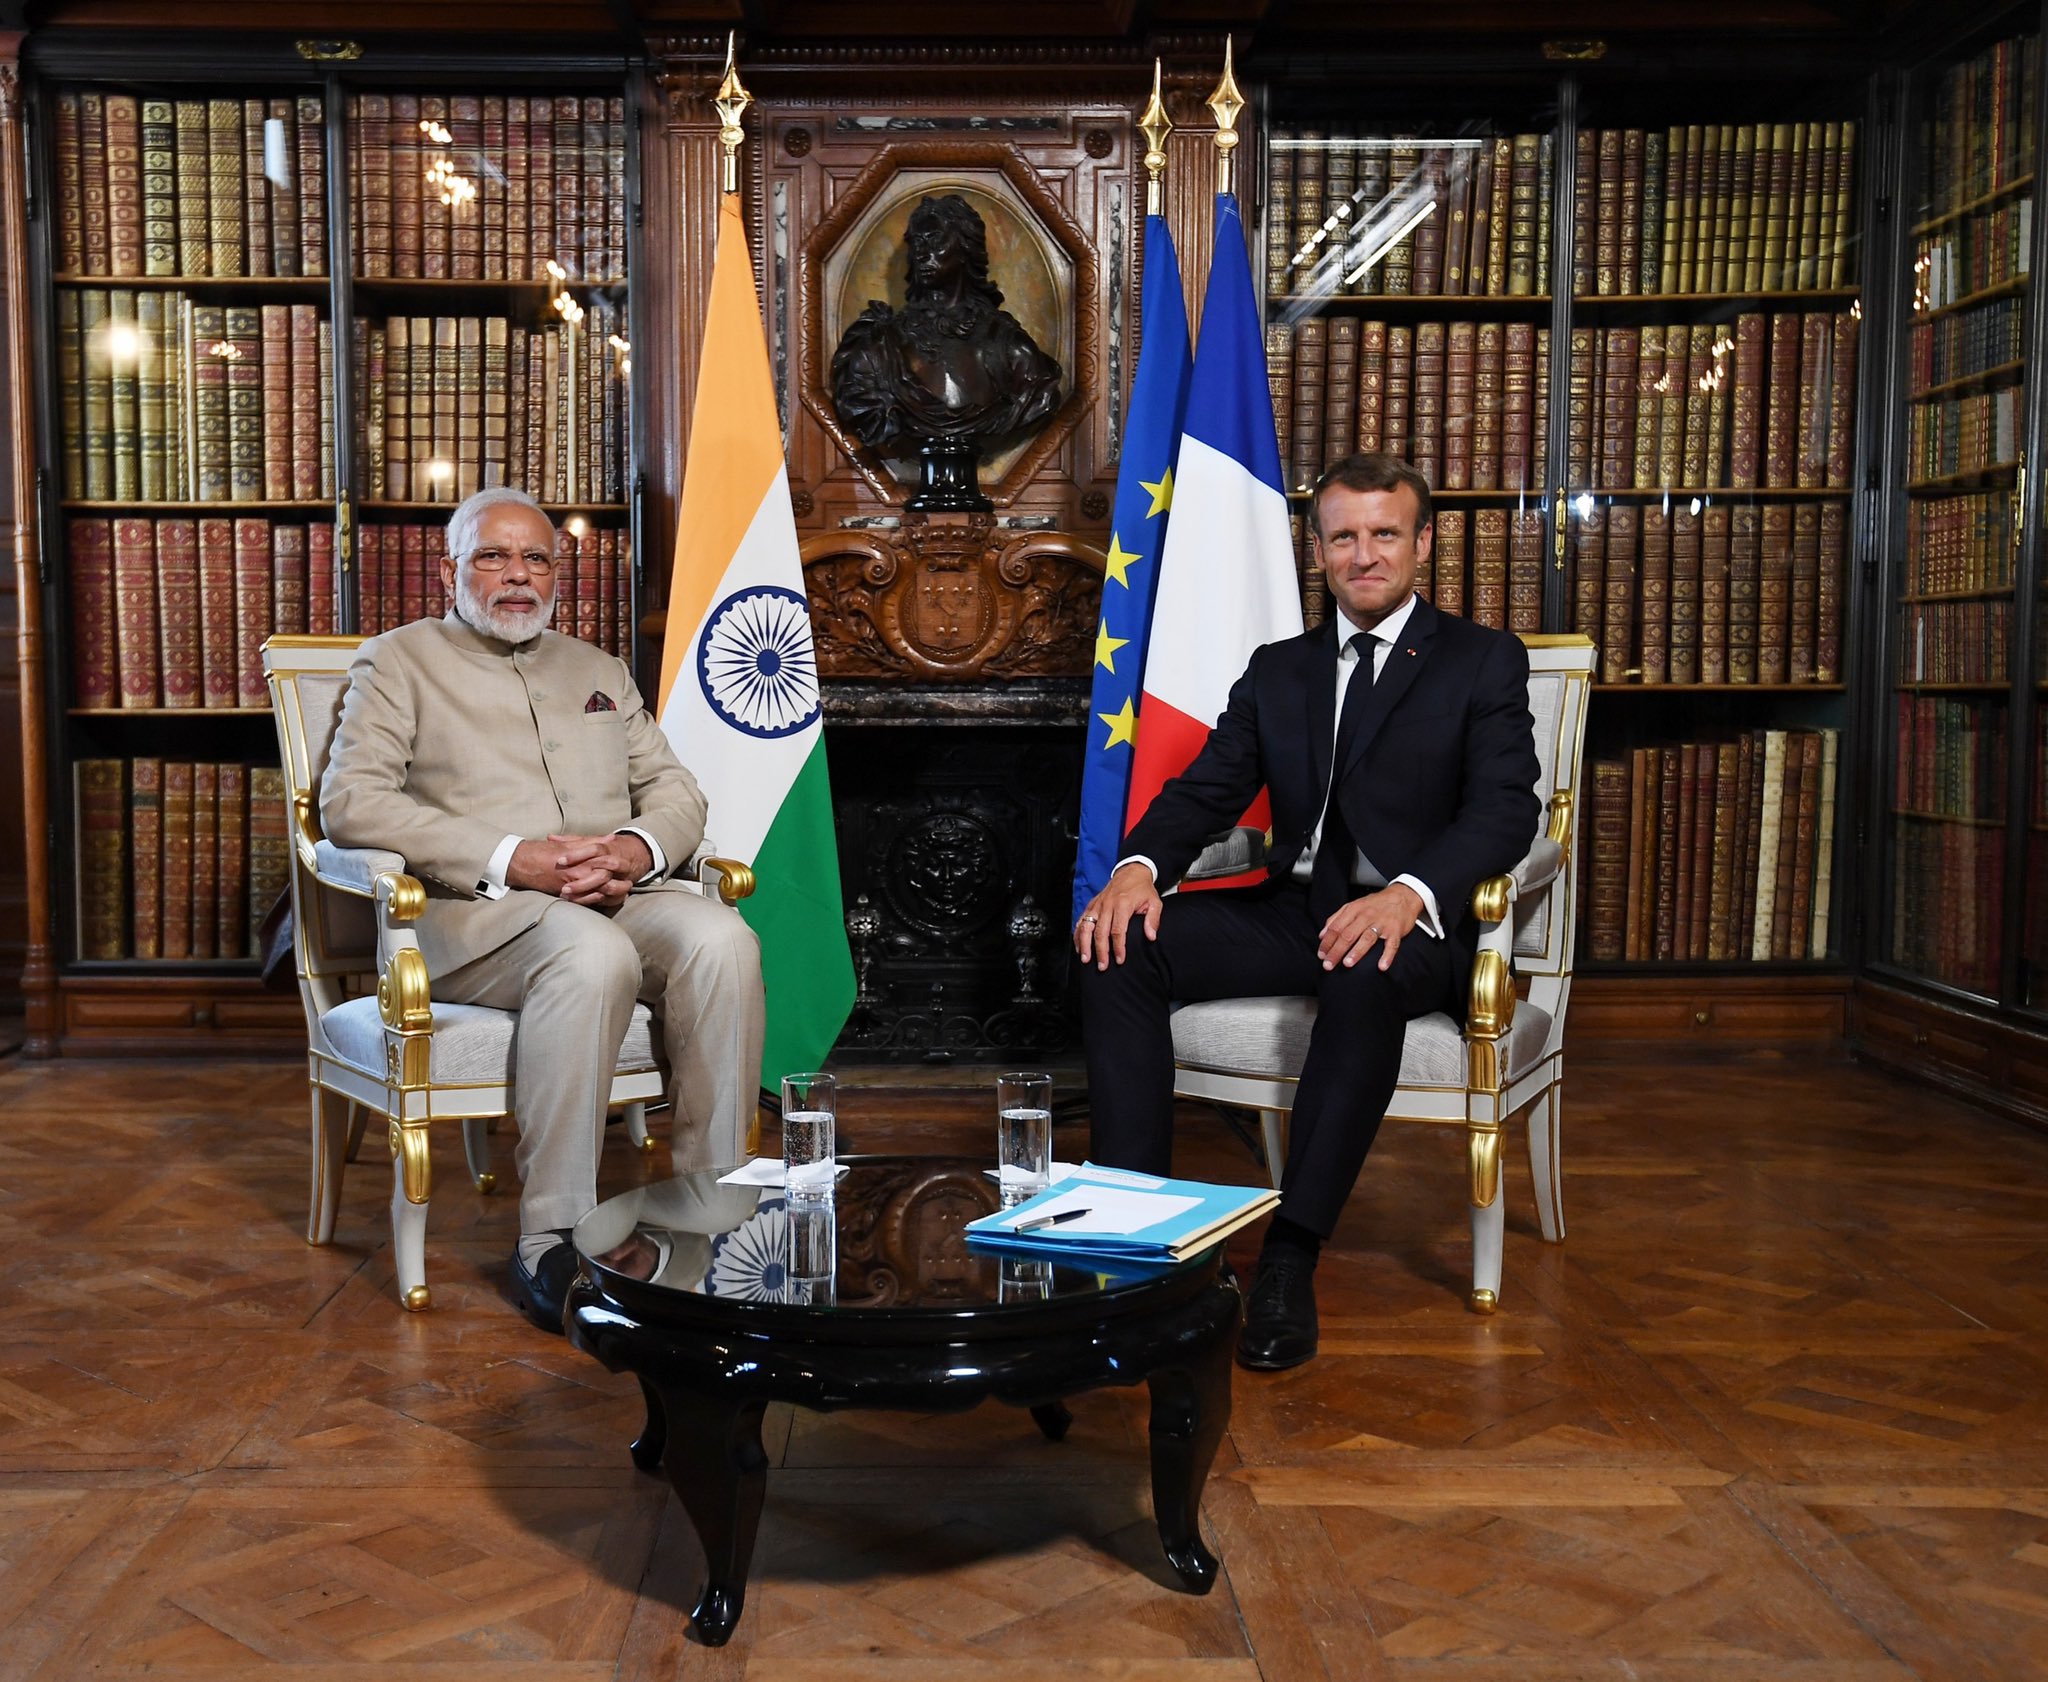 PM Modi with French President